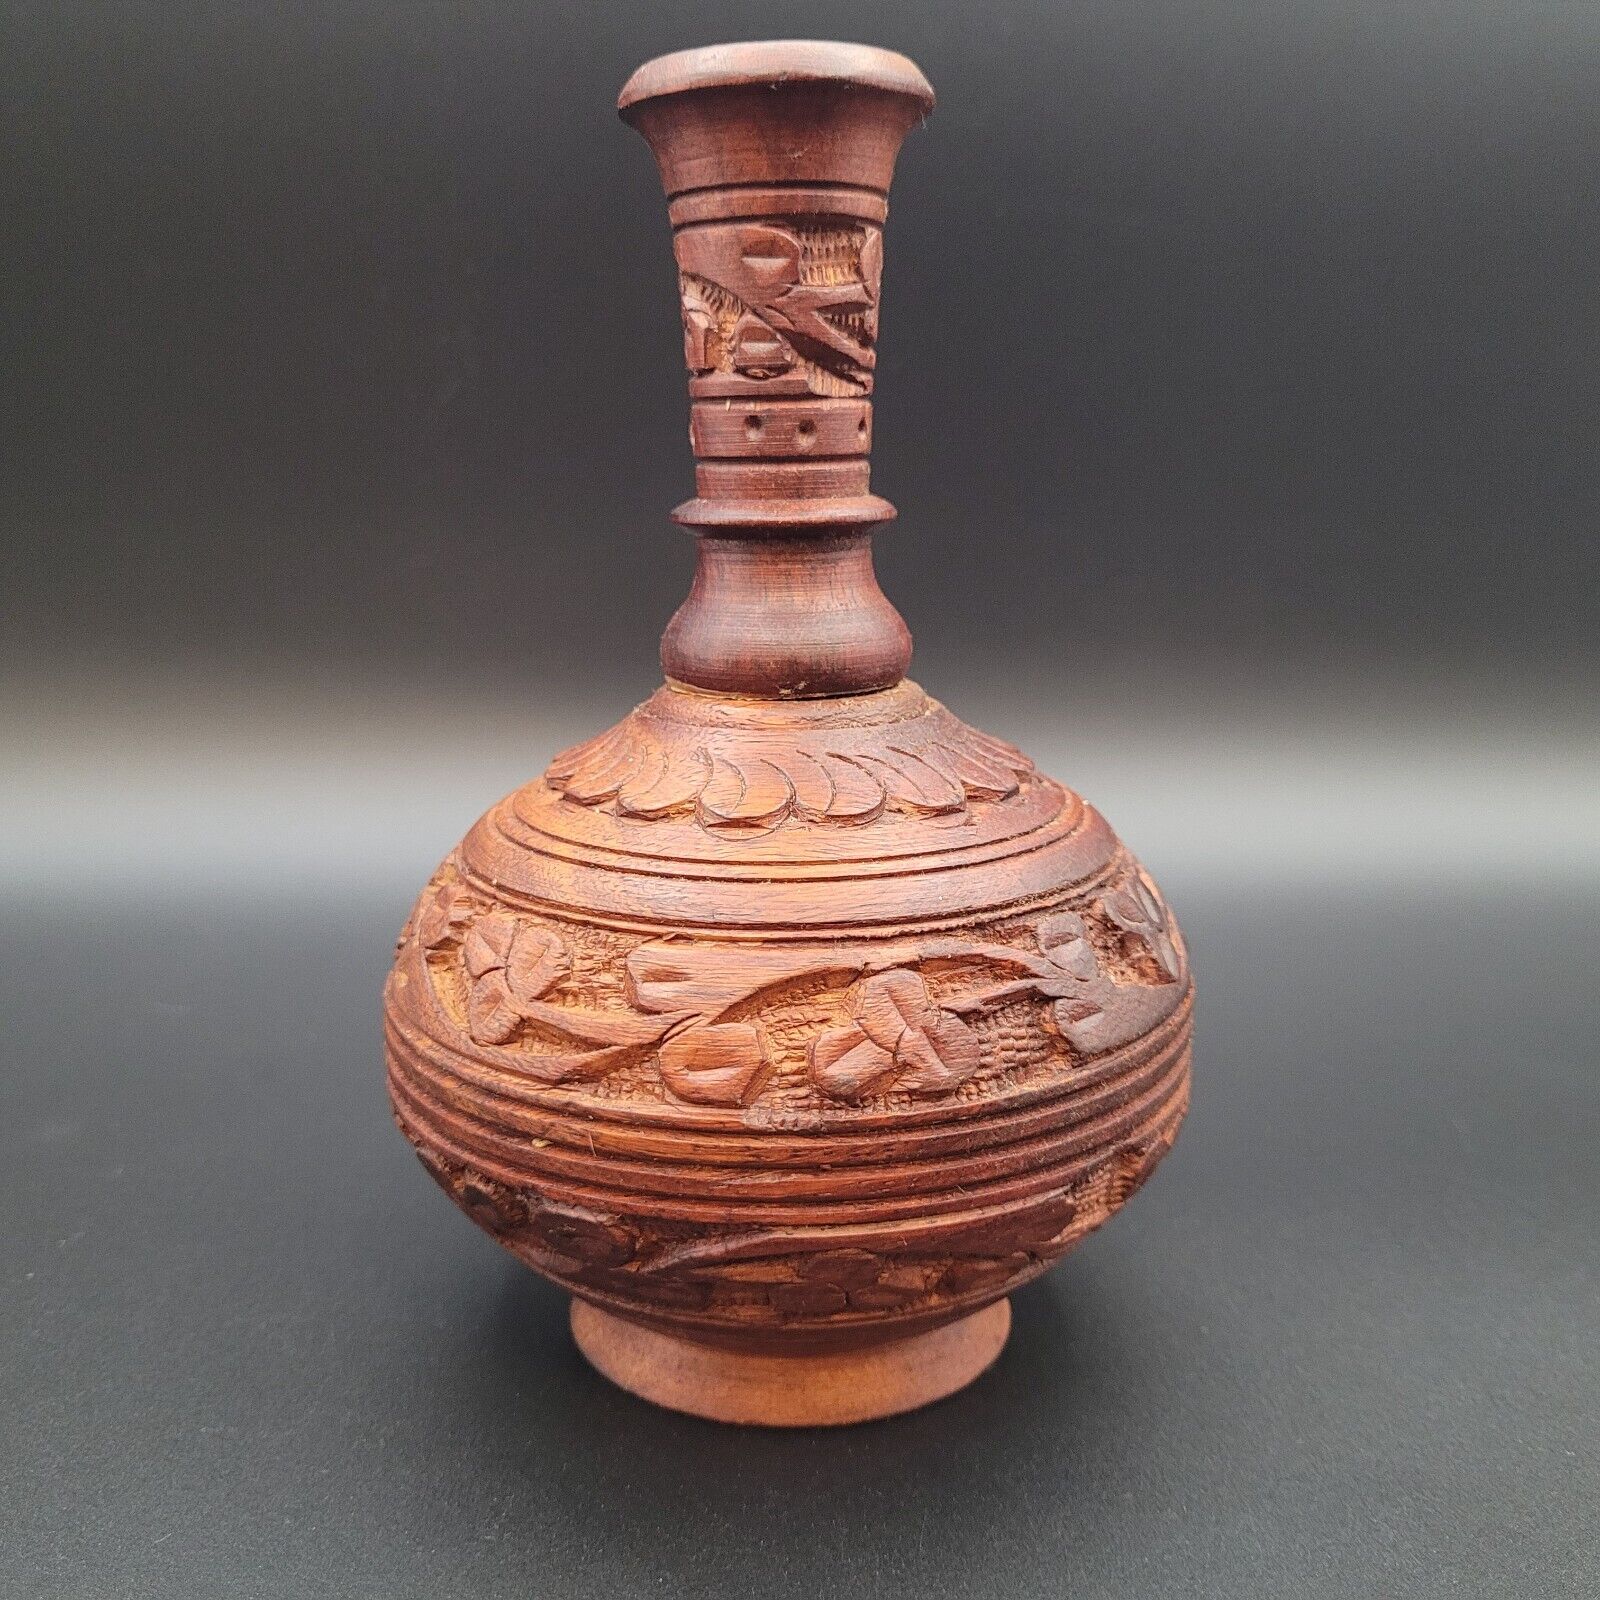 Wooden Hand Carved Vase with Floral Accents